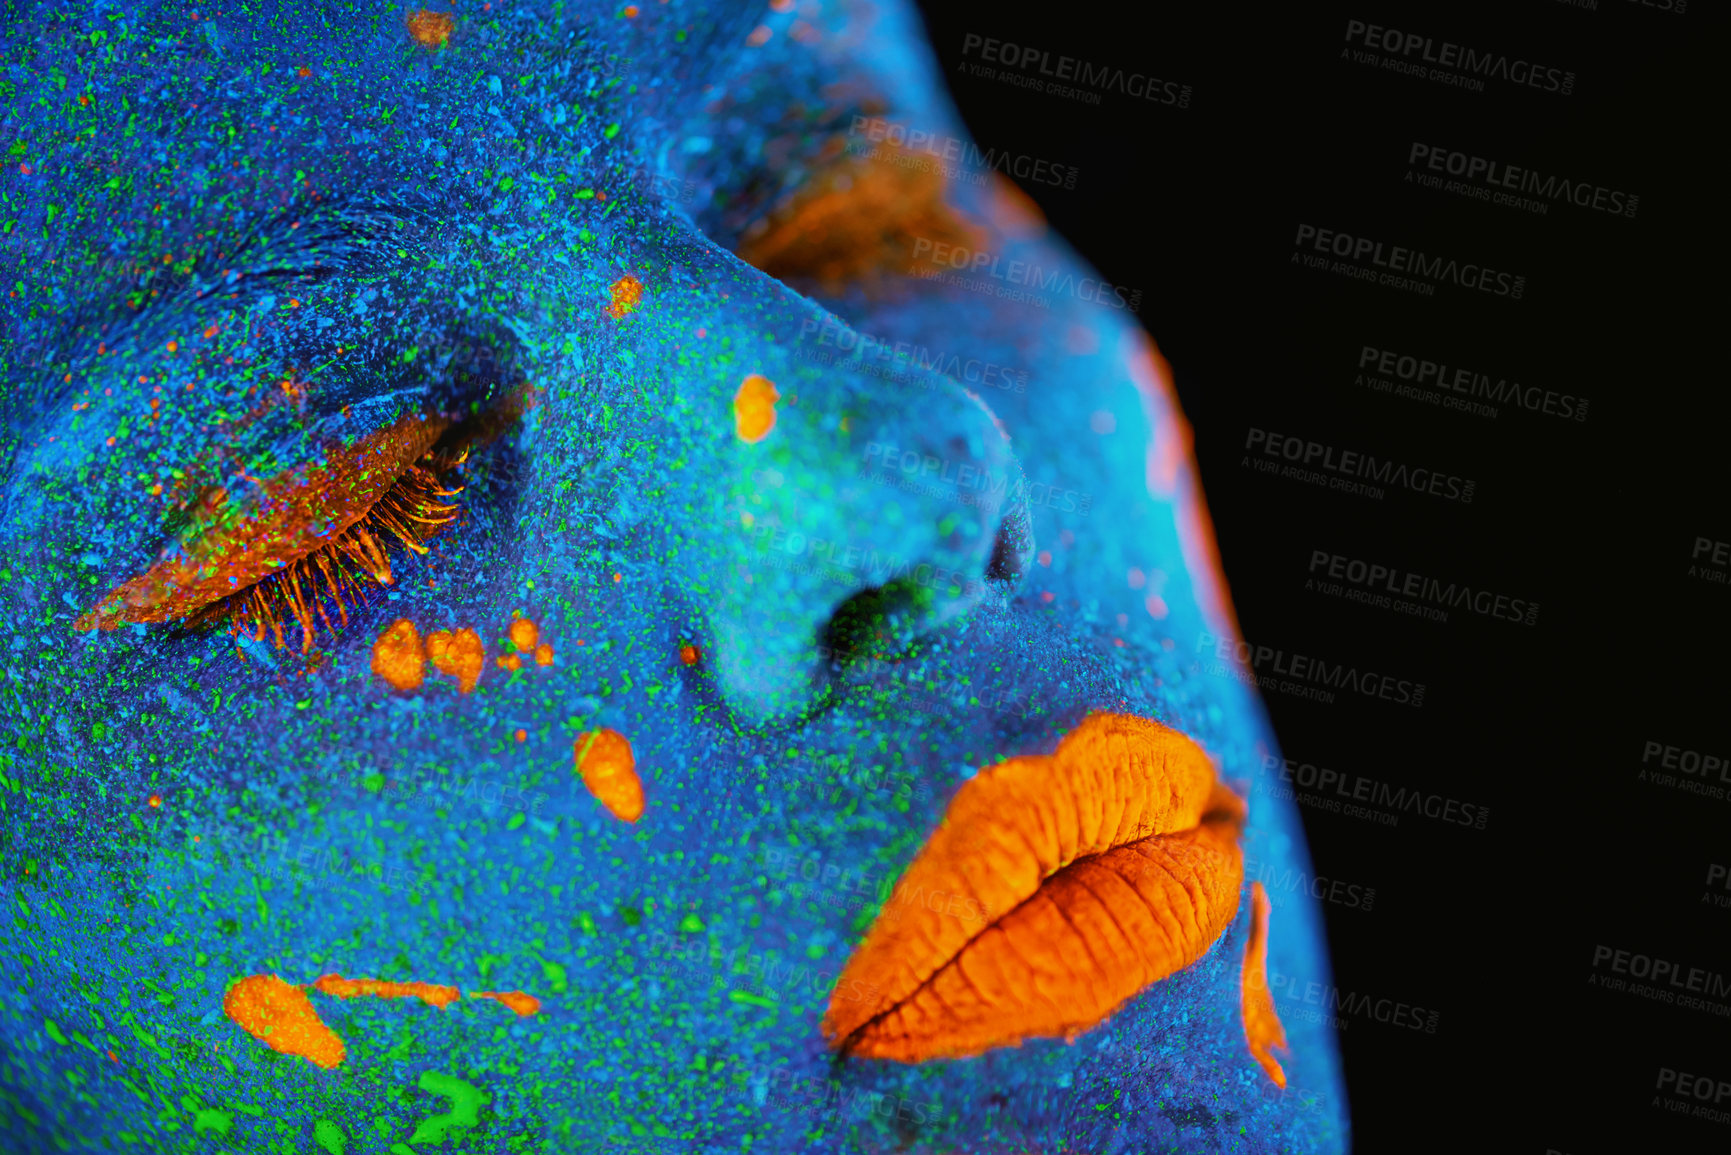 Buy stock photo Neon paint, makeup and woman face closeup with dark background and creative cosmetics. Surreal glow, fantasy and psychedelic cosmetic of a female model with unique and creativity art in studio